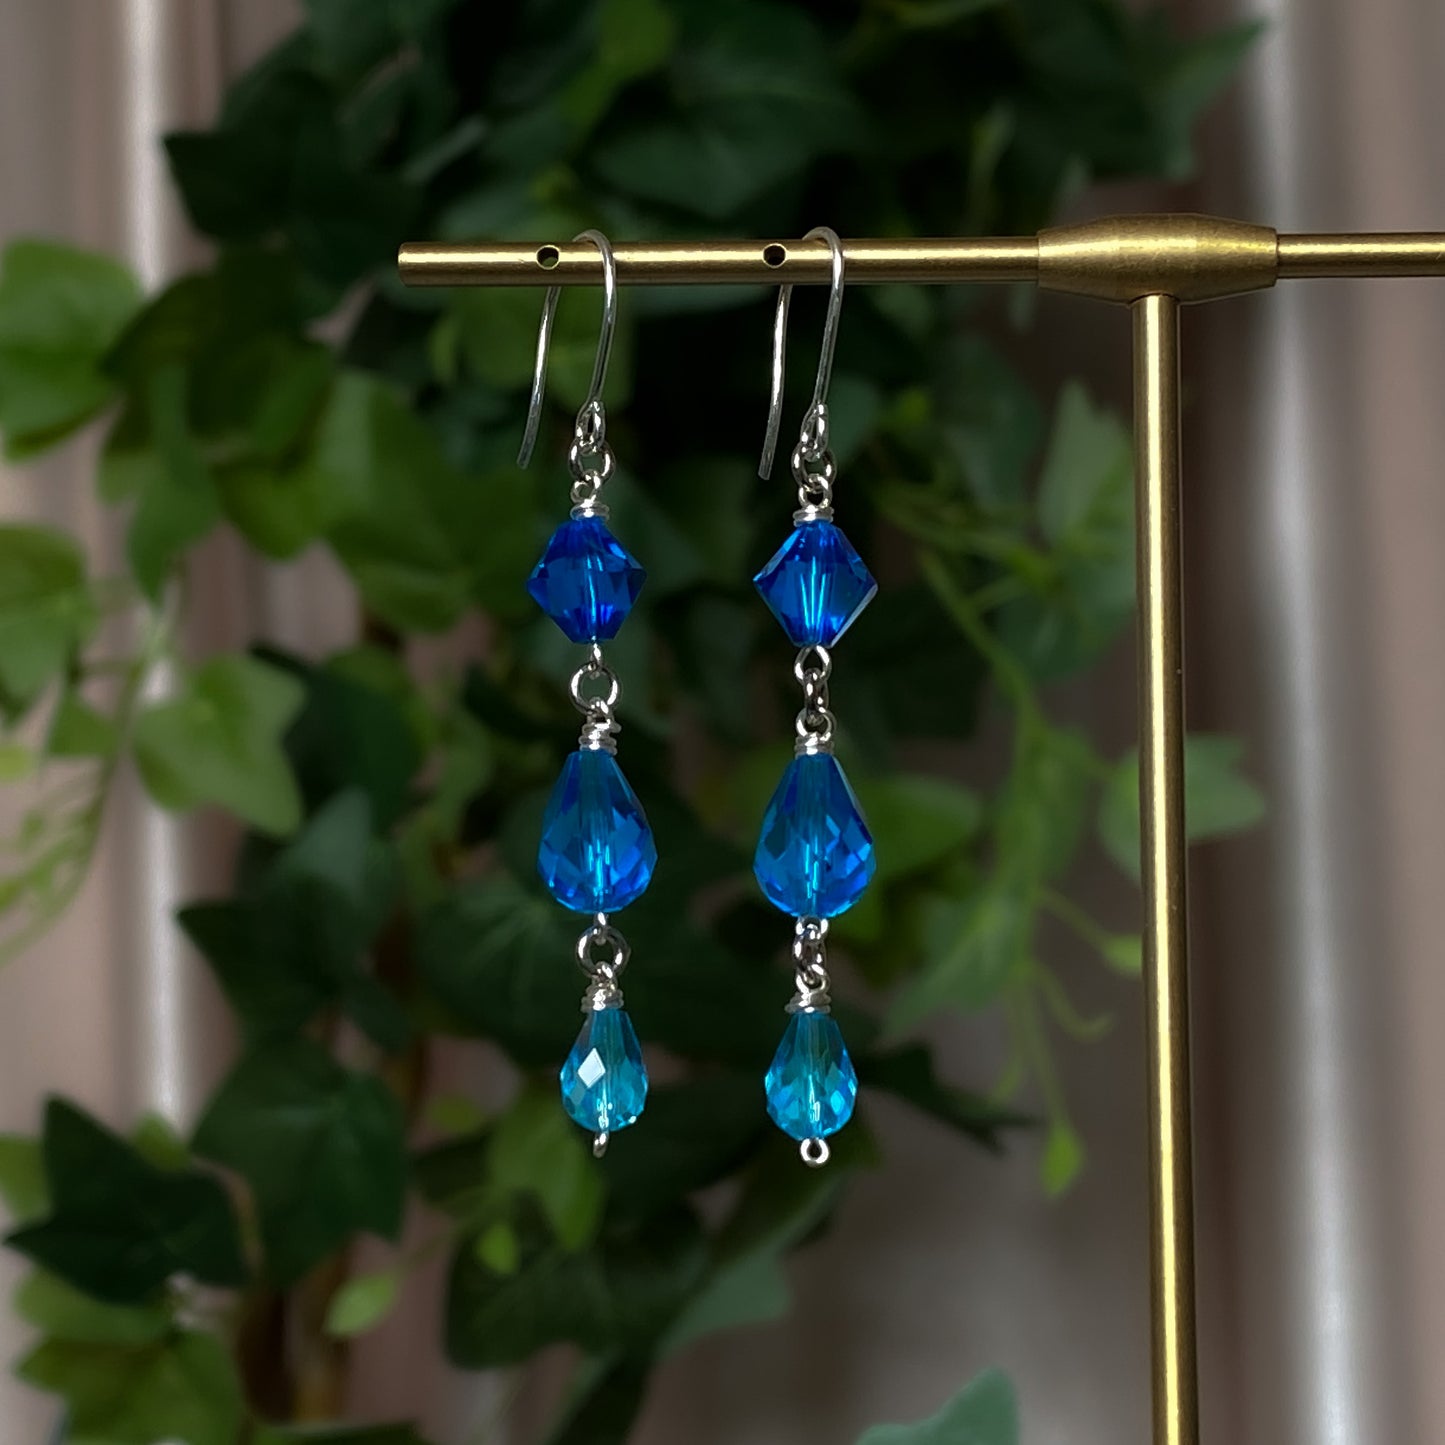 Make-Your-Own Water Droplet Earring Kit